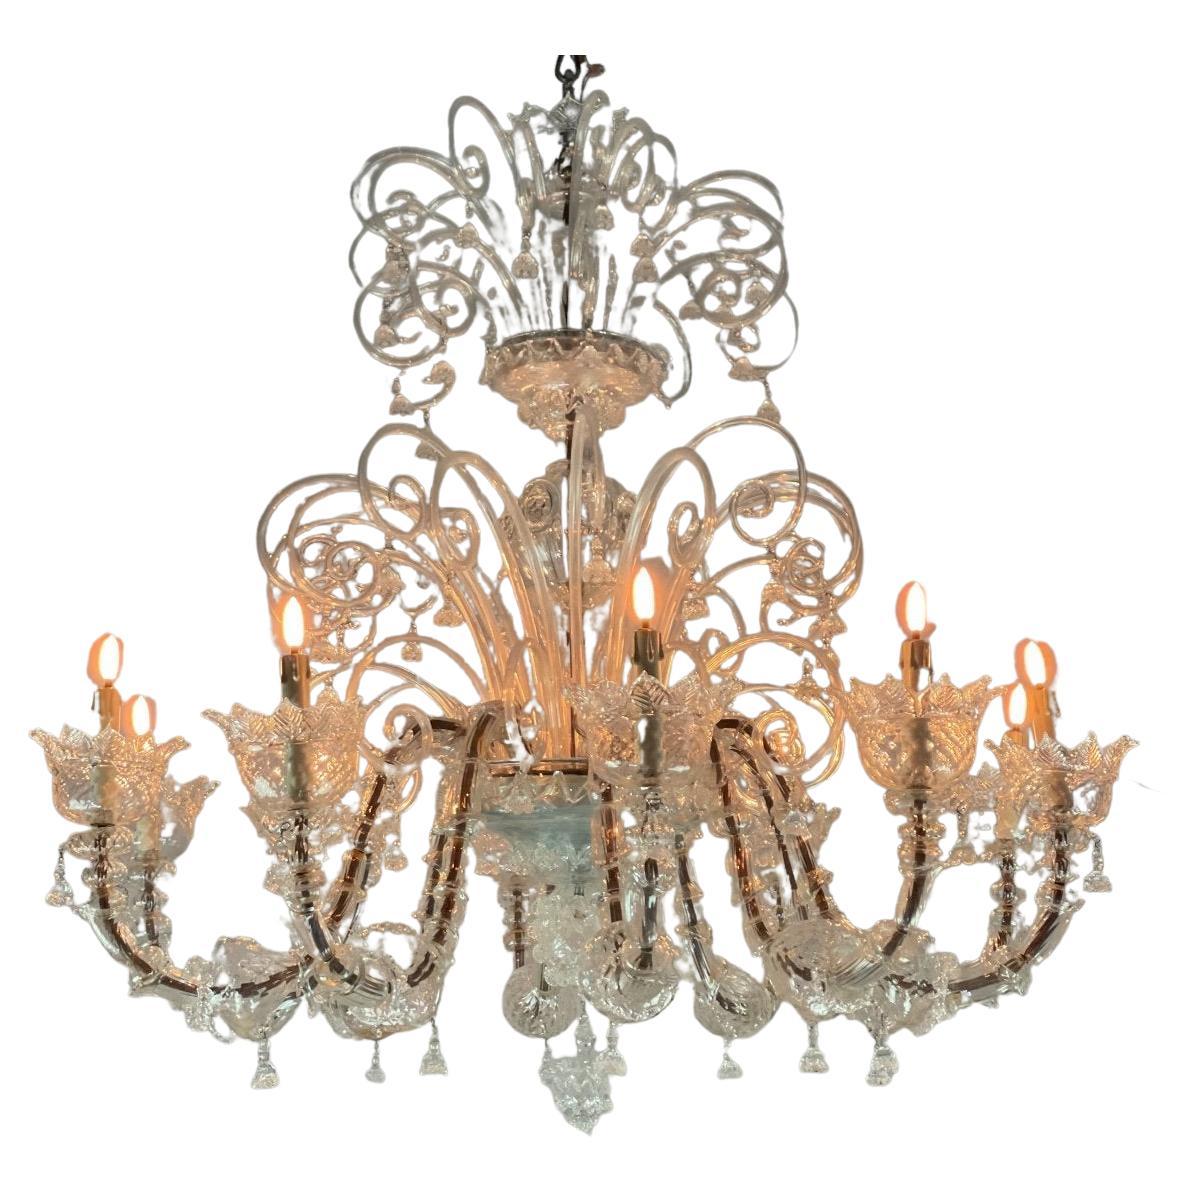 Rezzonico Venetian Chandelier in Colorless Murano Glass, 10 Arms of Light